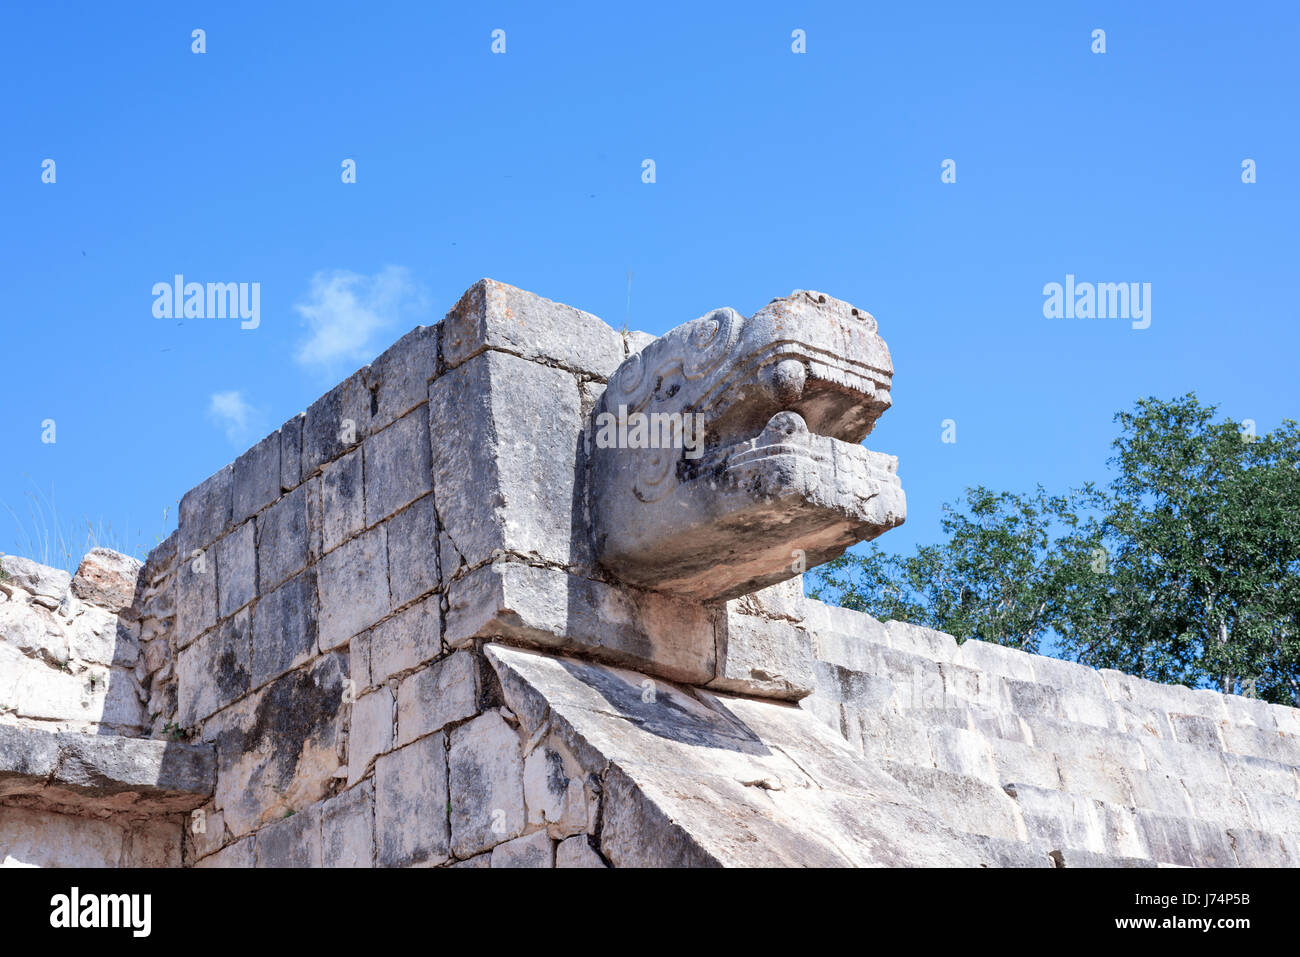 upward view of the stone jaguar head statue at the Platform of the Eagles and Jaguars in Mayan Ruins of Chichen Itza, Mexico Stock Photo